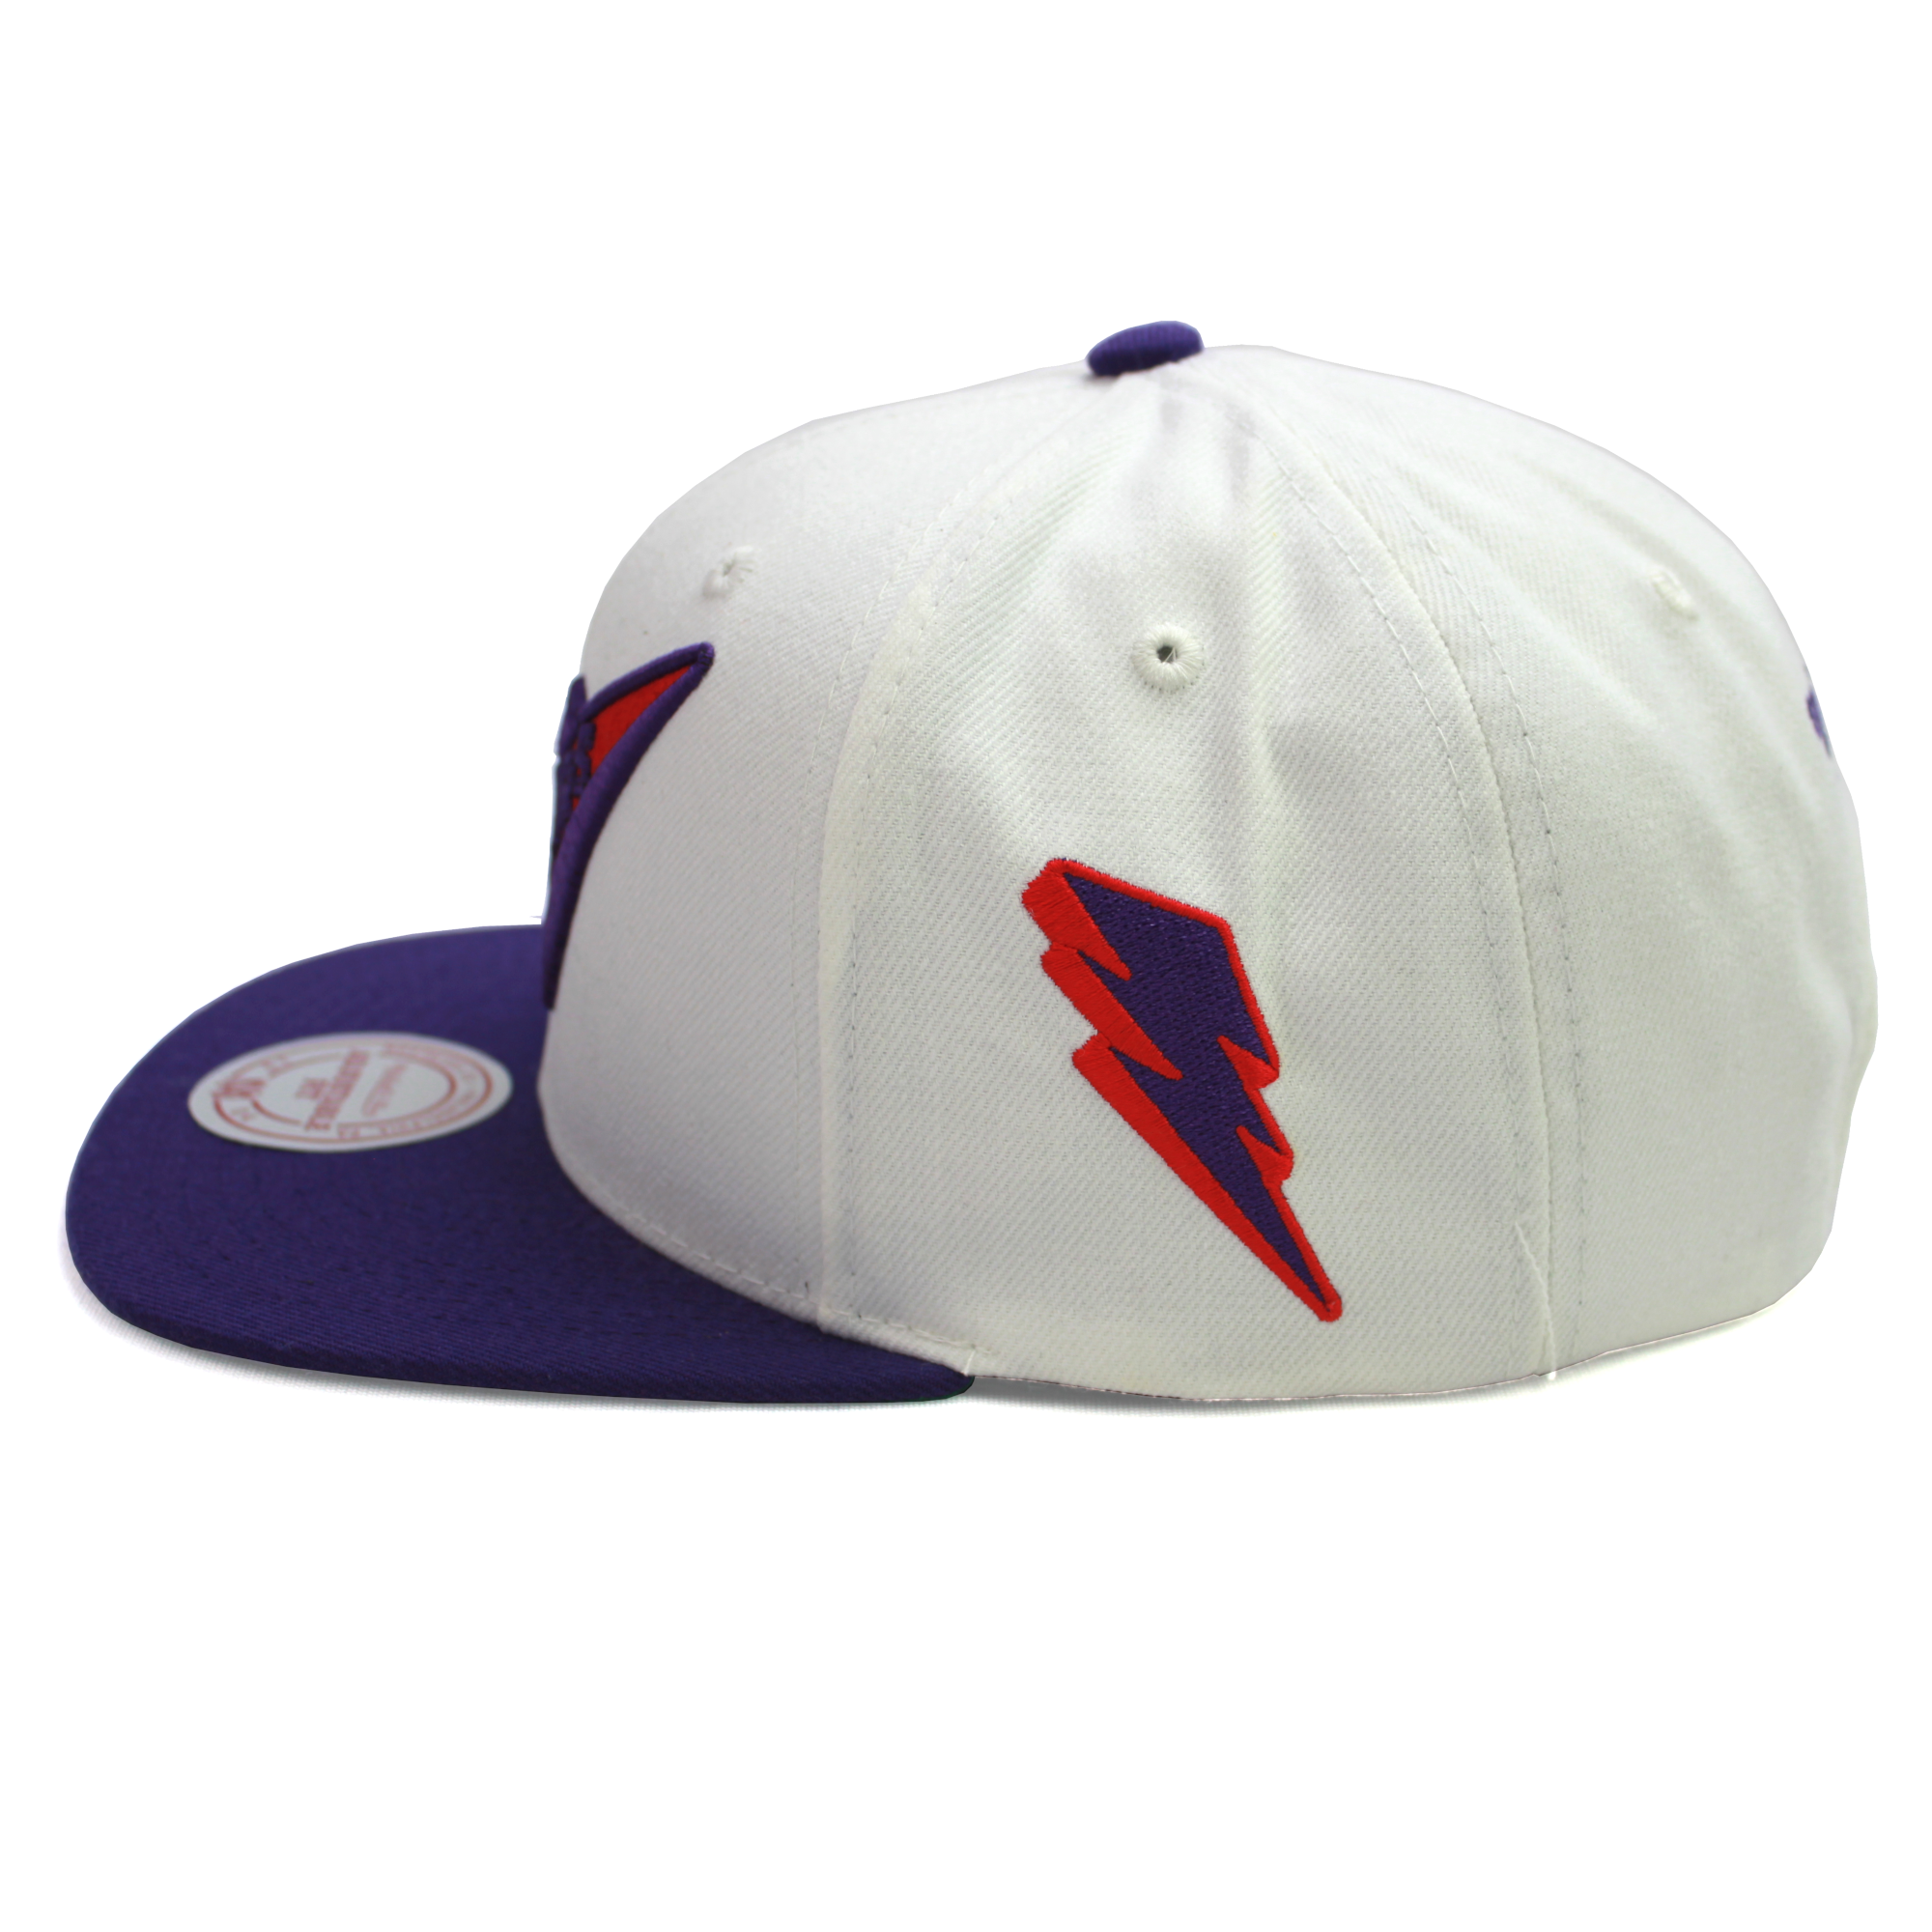 Freethrow Snap Raptors Cap by Mitchell & Ness - 31,95 €